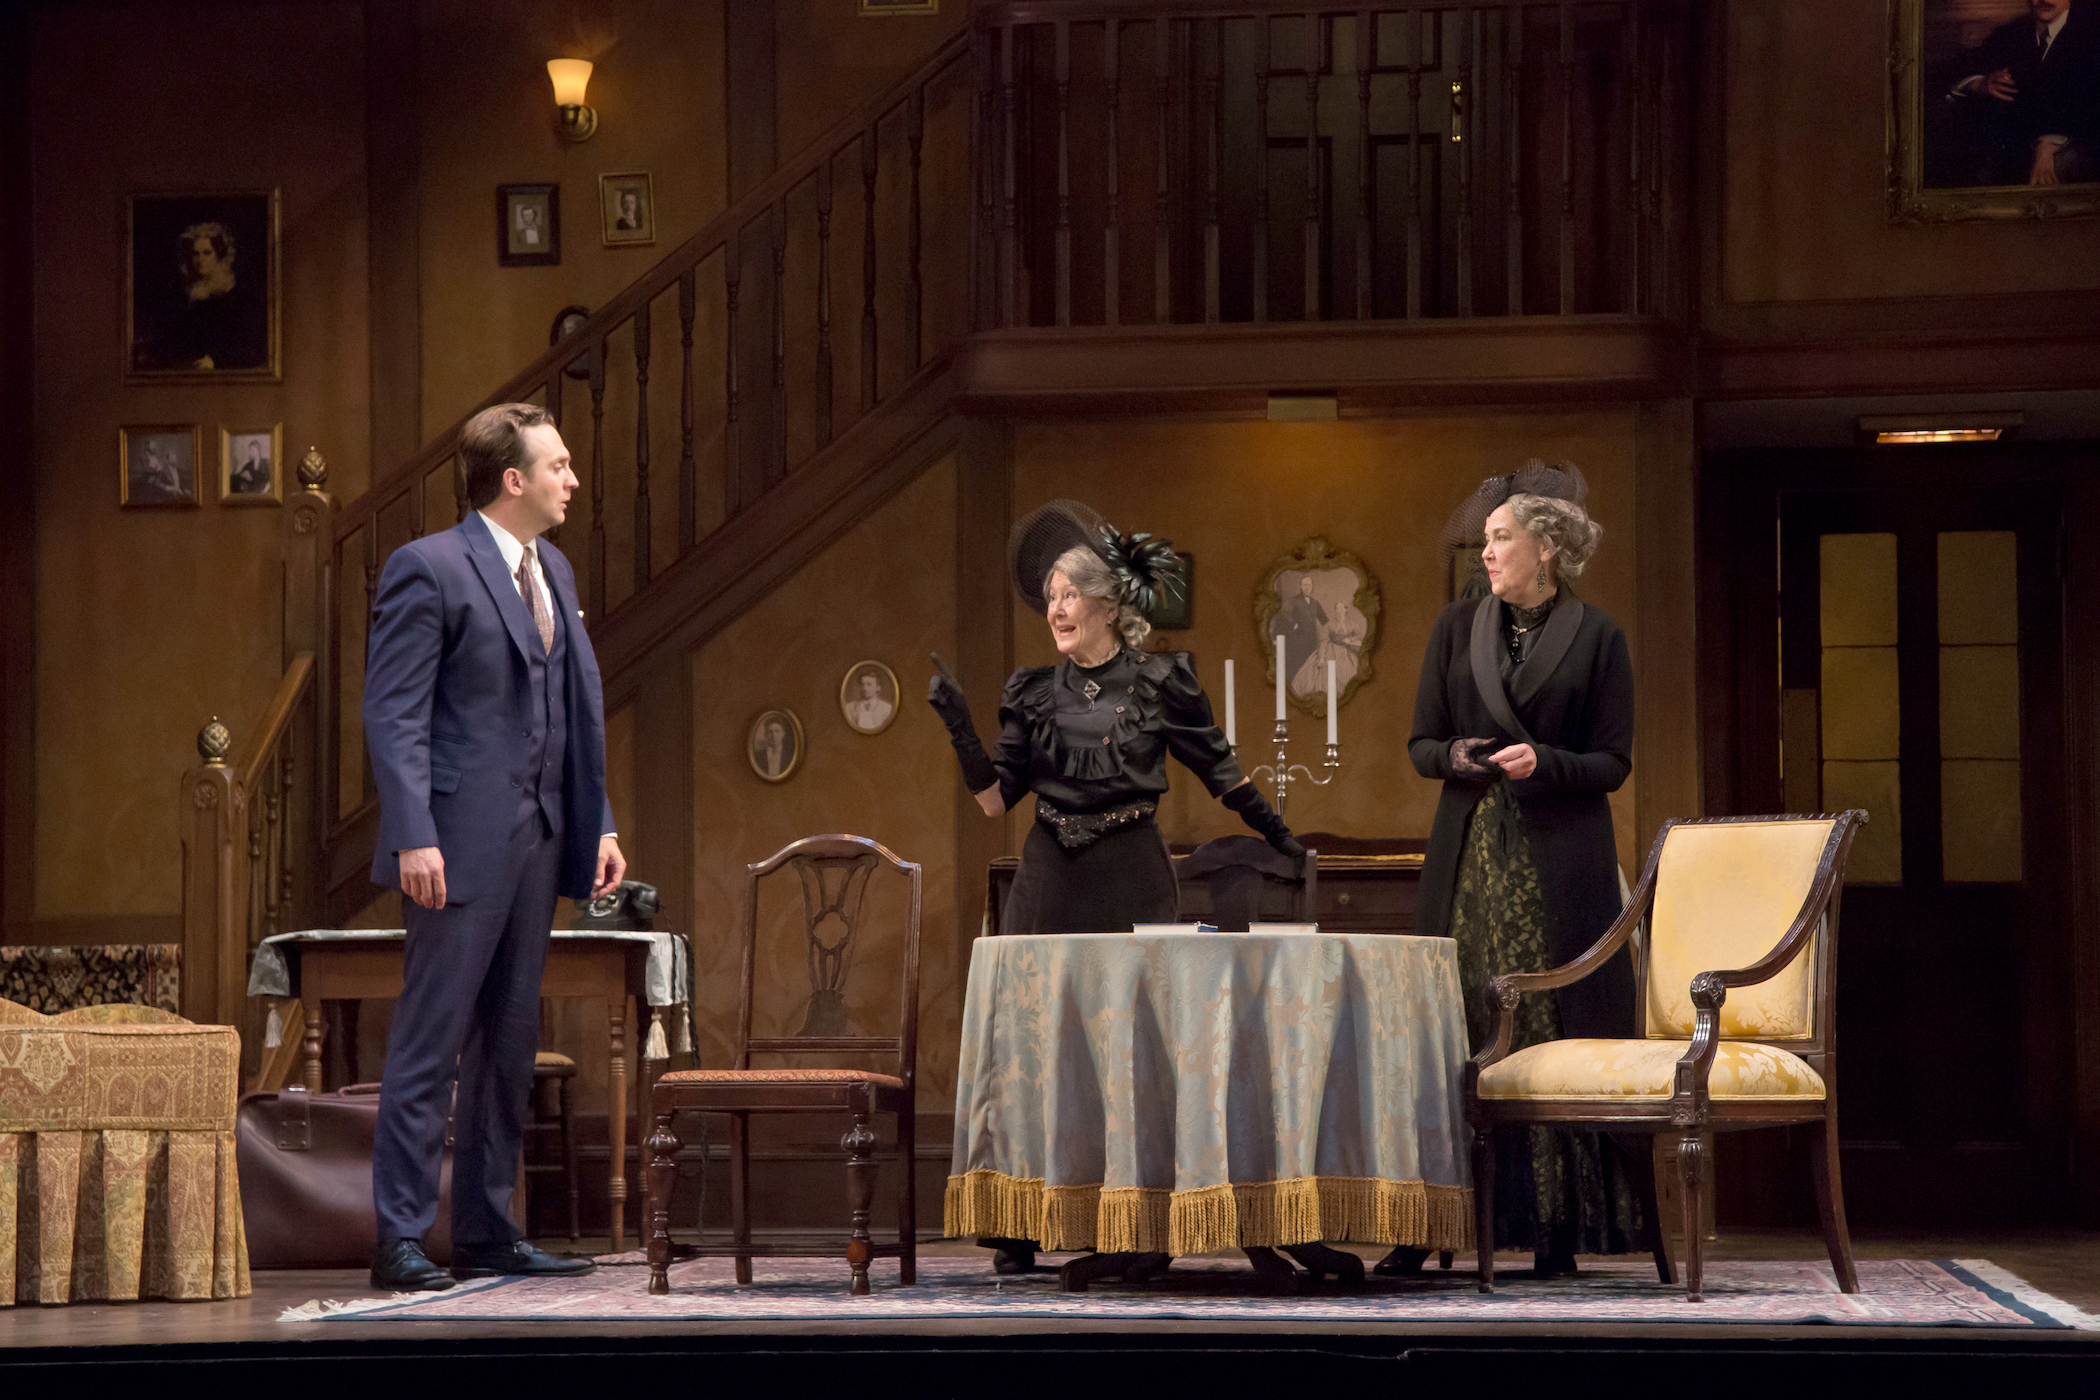 Arsenic and old Lace. Theatre talk